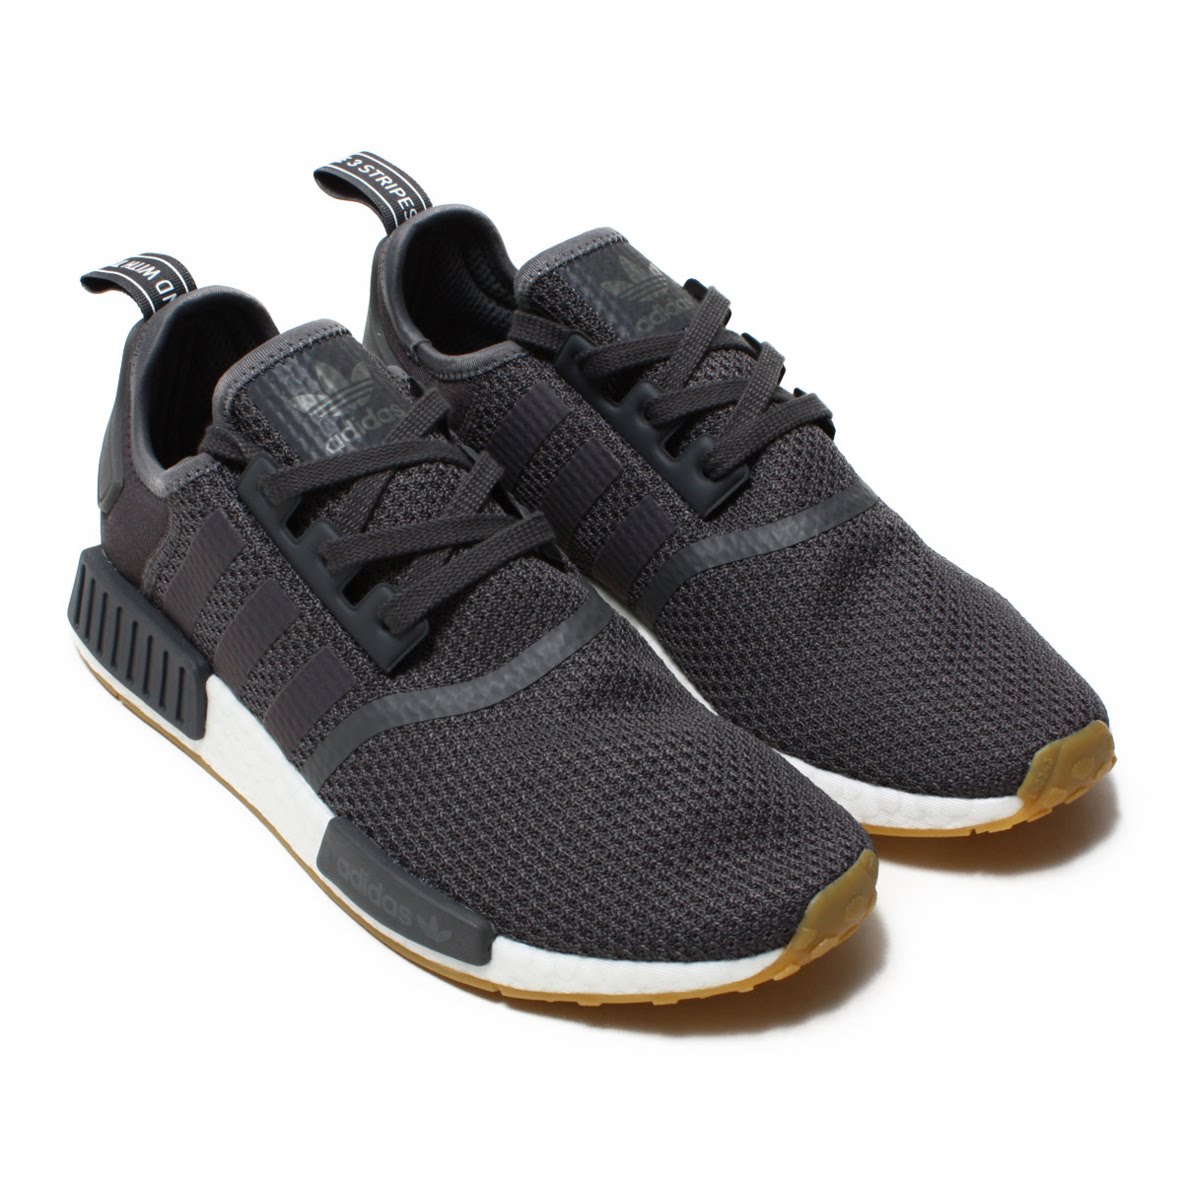 grey and black nmd r1